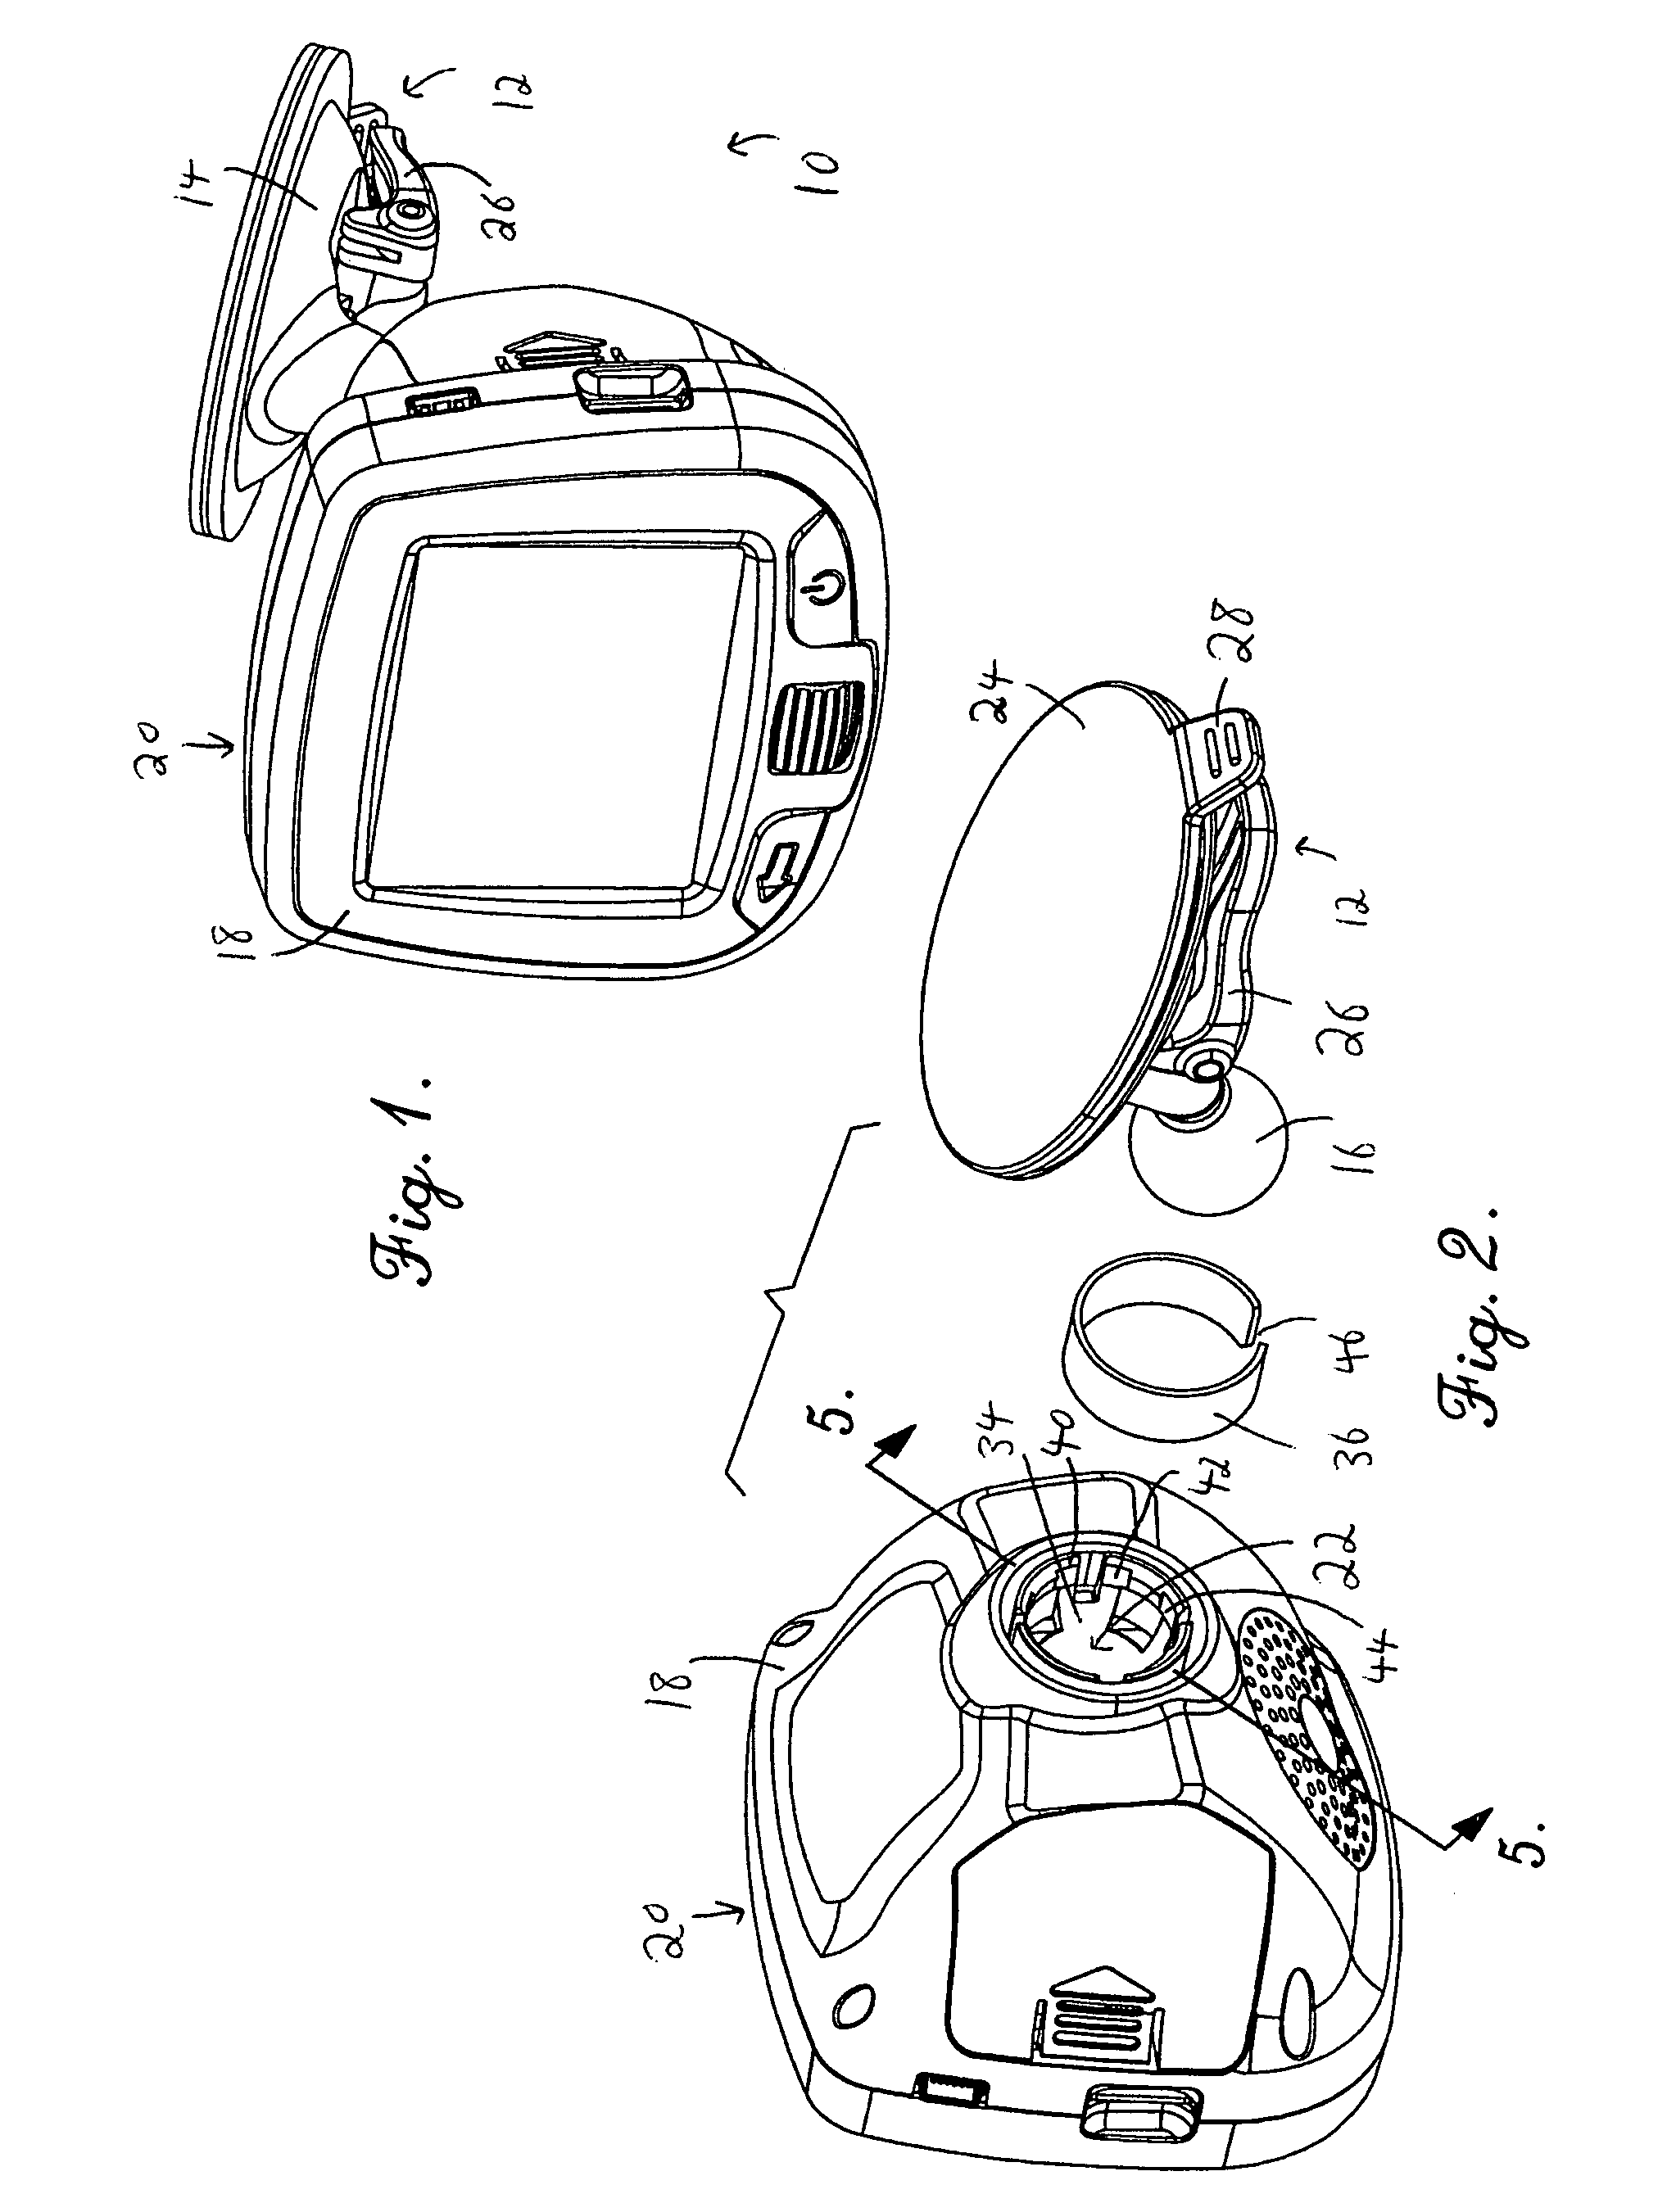 Mount assembly for electronic devices